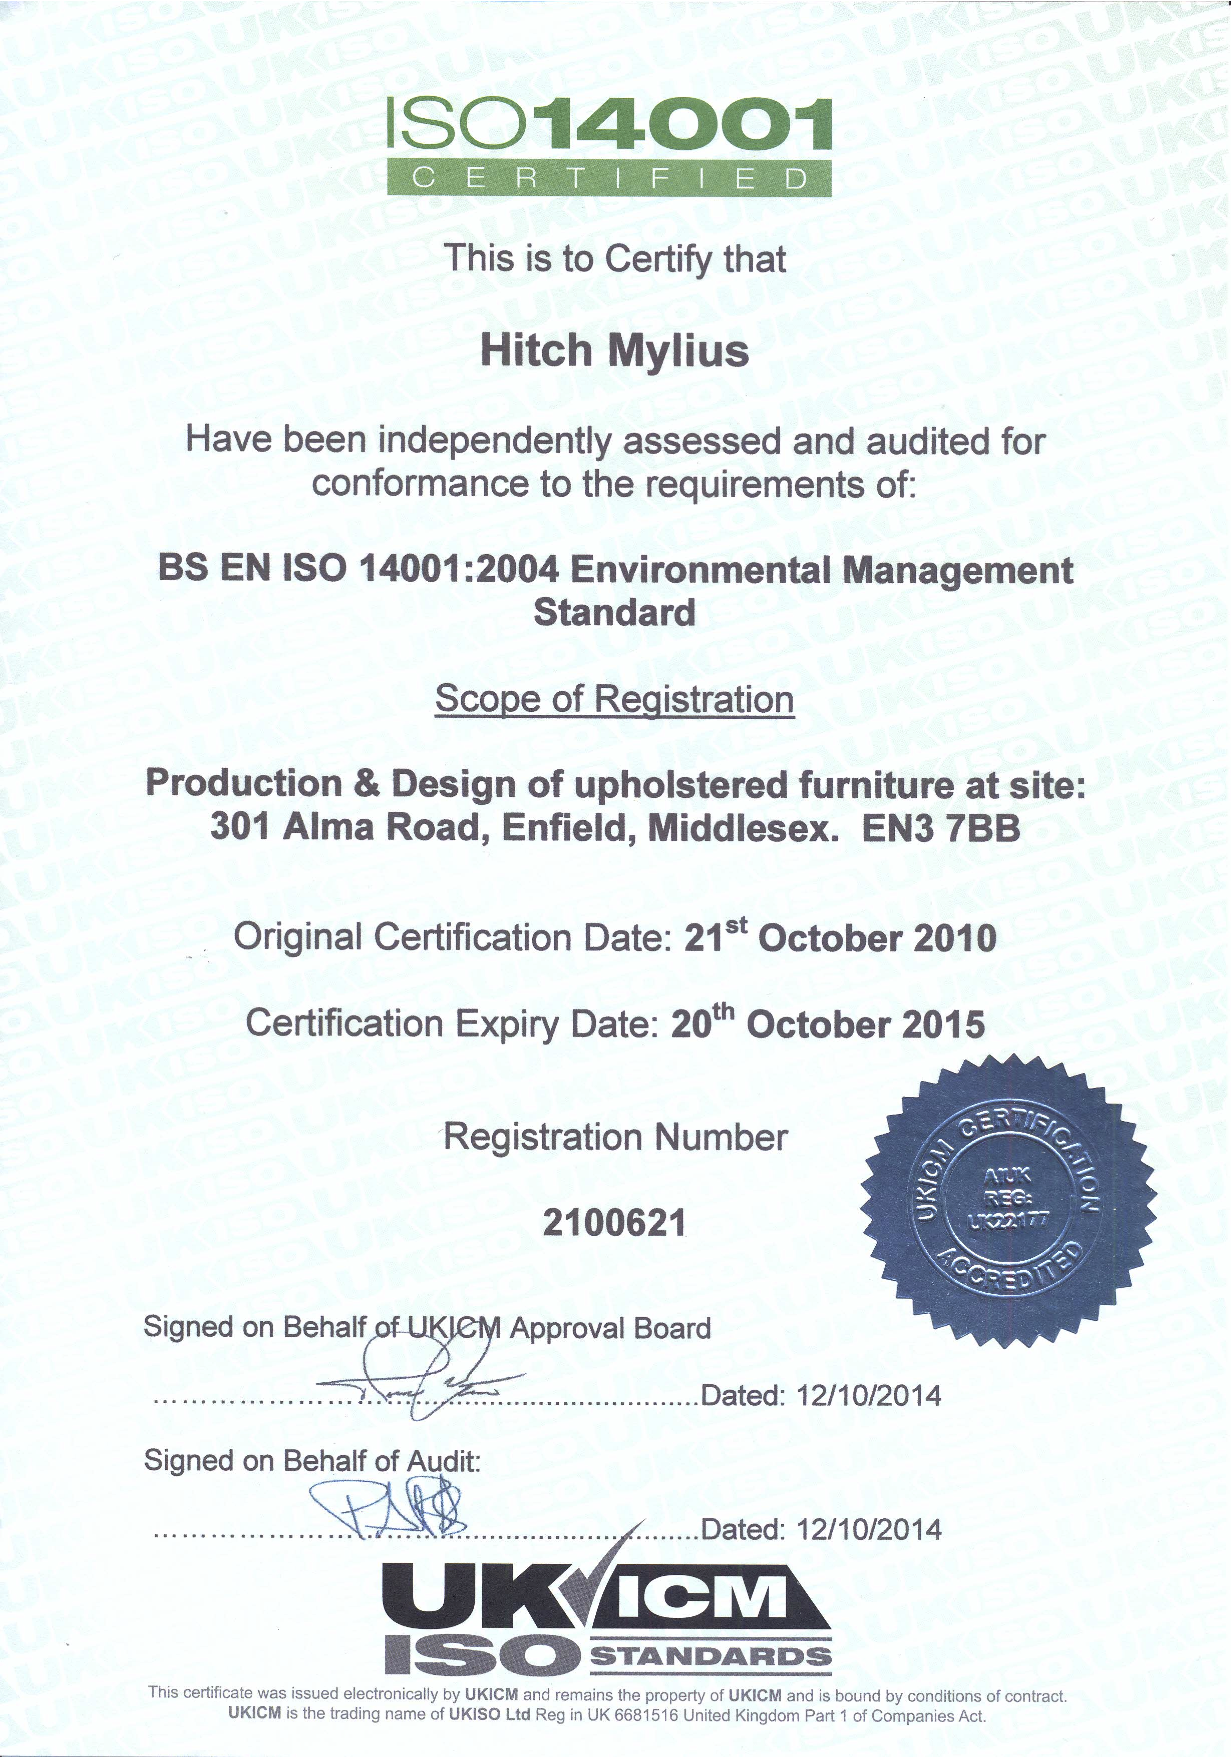  ISO14001 certificate 2014-2015